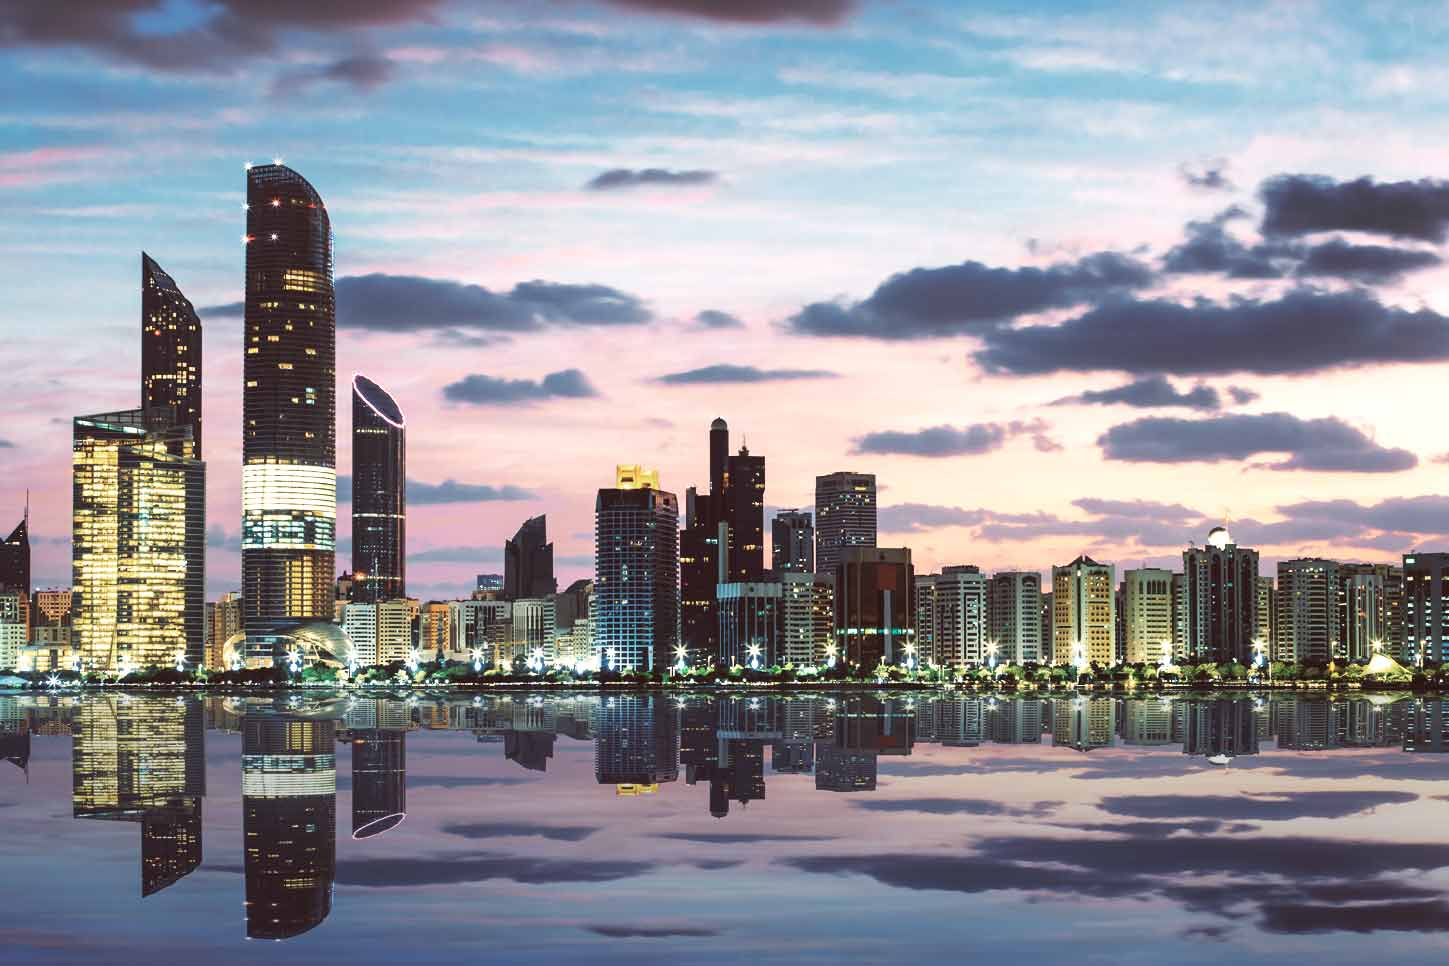 An Abu Dhabi day trip from Dubai is the perfect way to discover the city